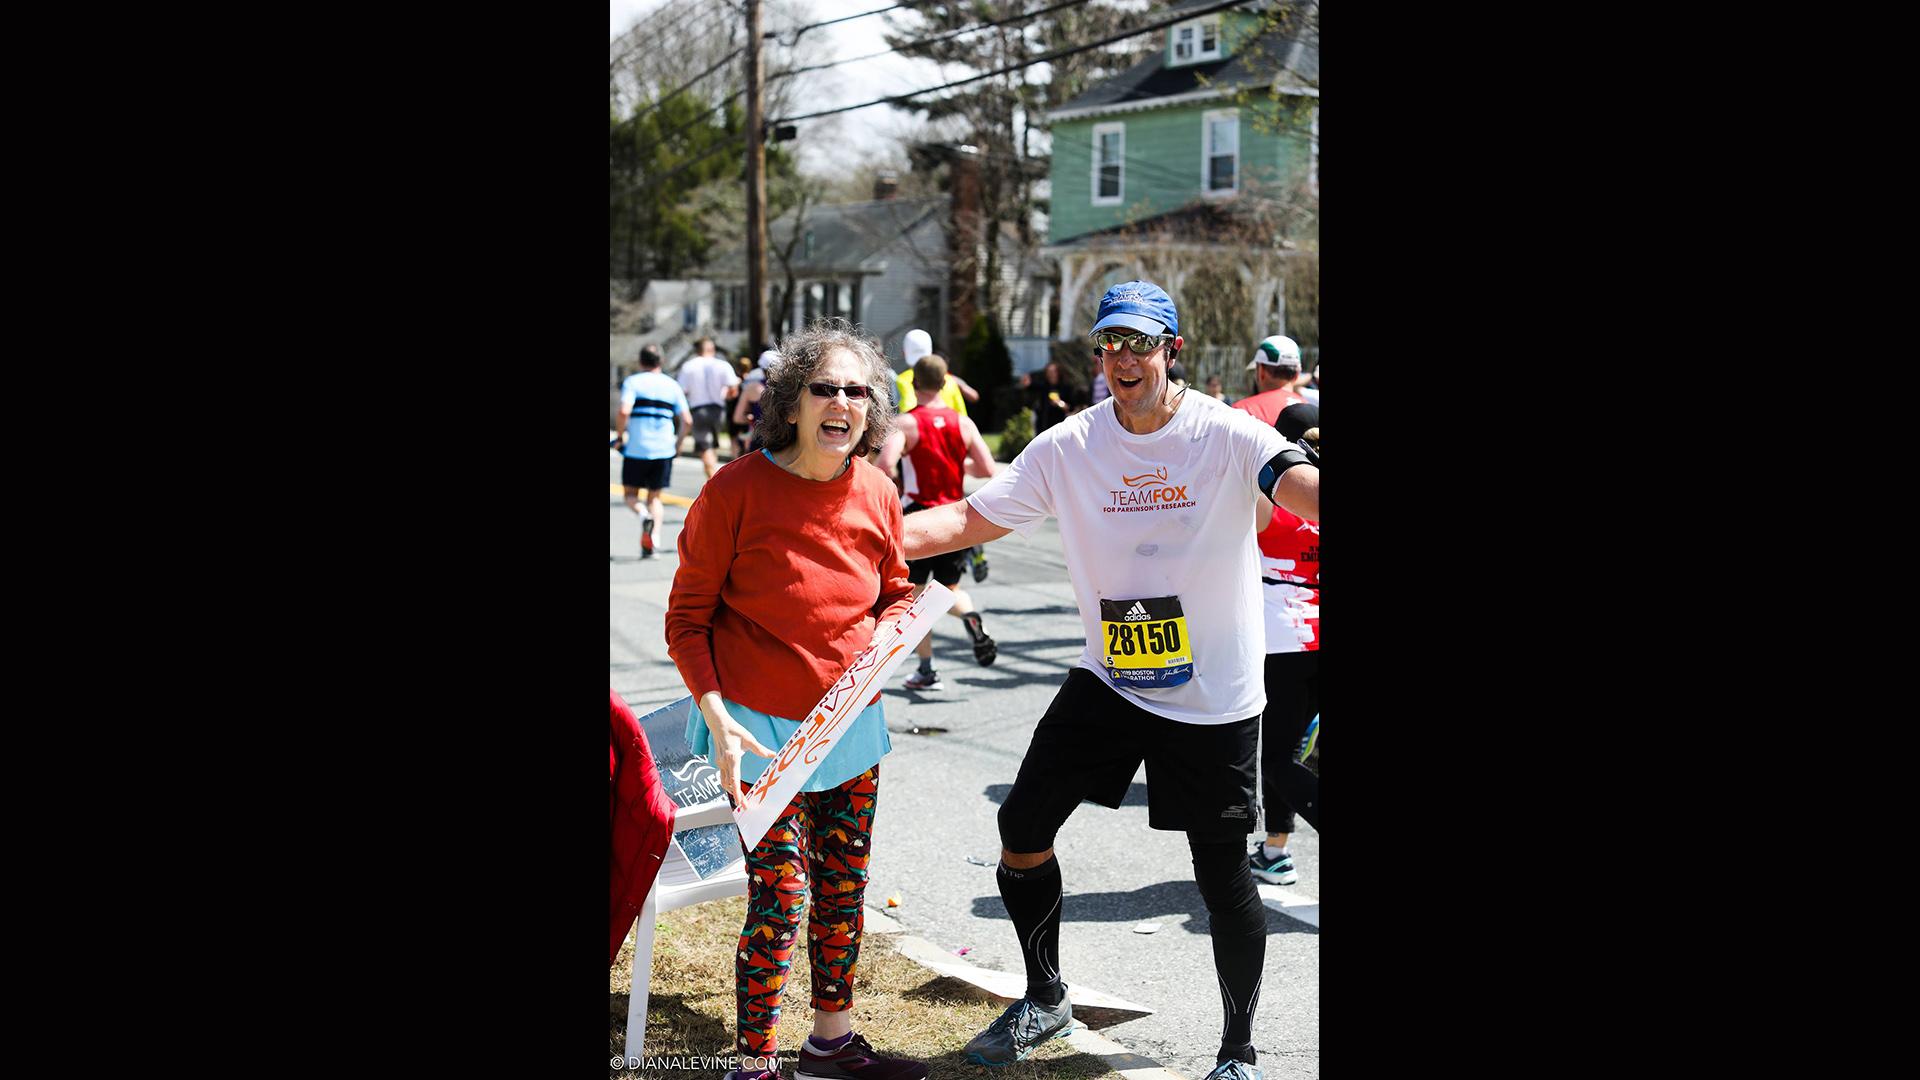 Bill Bucklew, right, poses for a picture with a supporter during the Boston Marathon on April 15, 2019. (Courtesy of Bill Bucklew)